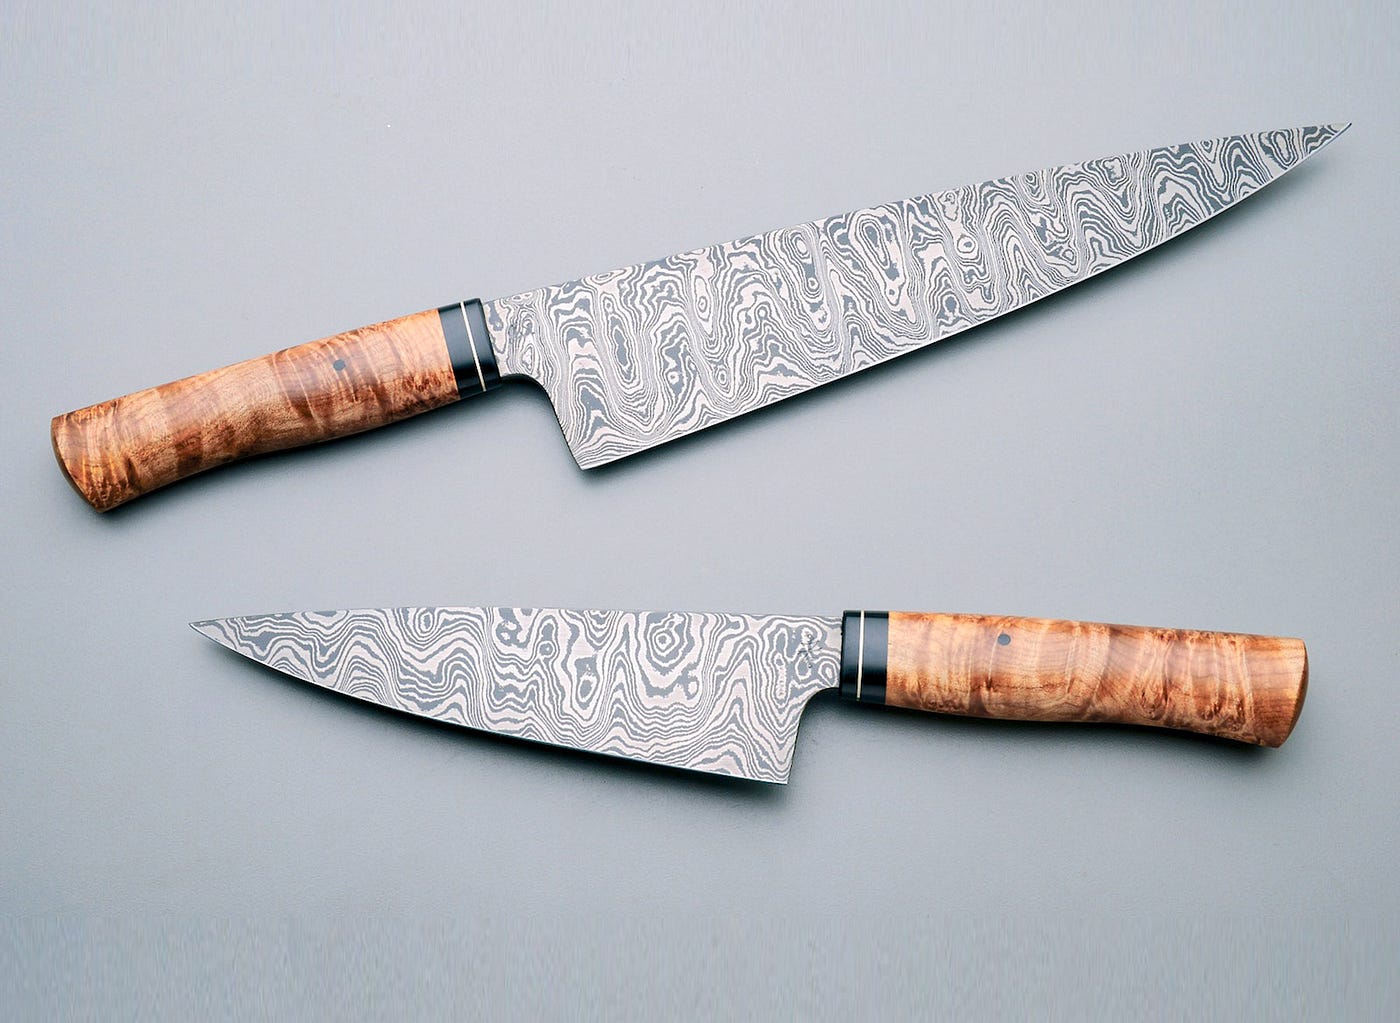 How to distinguish a real Damascus knife?